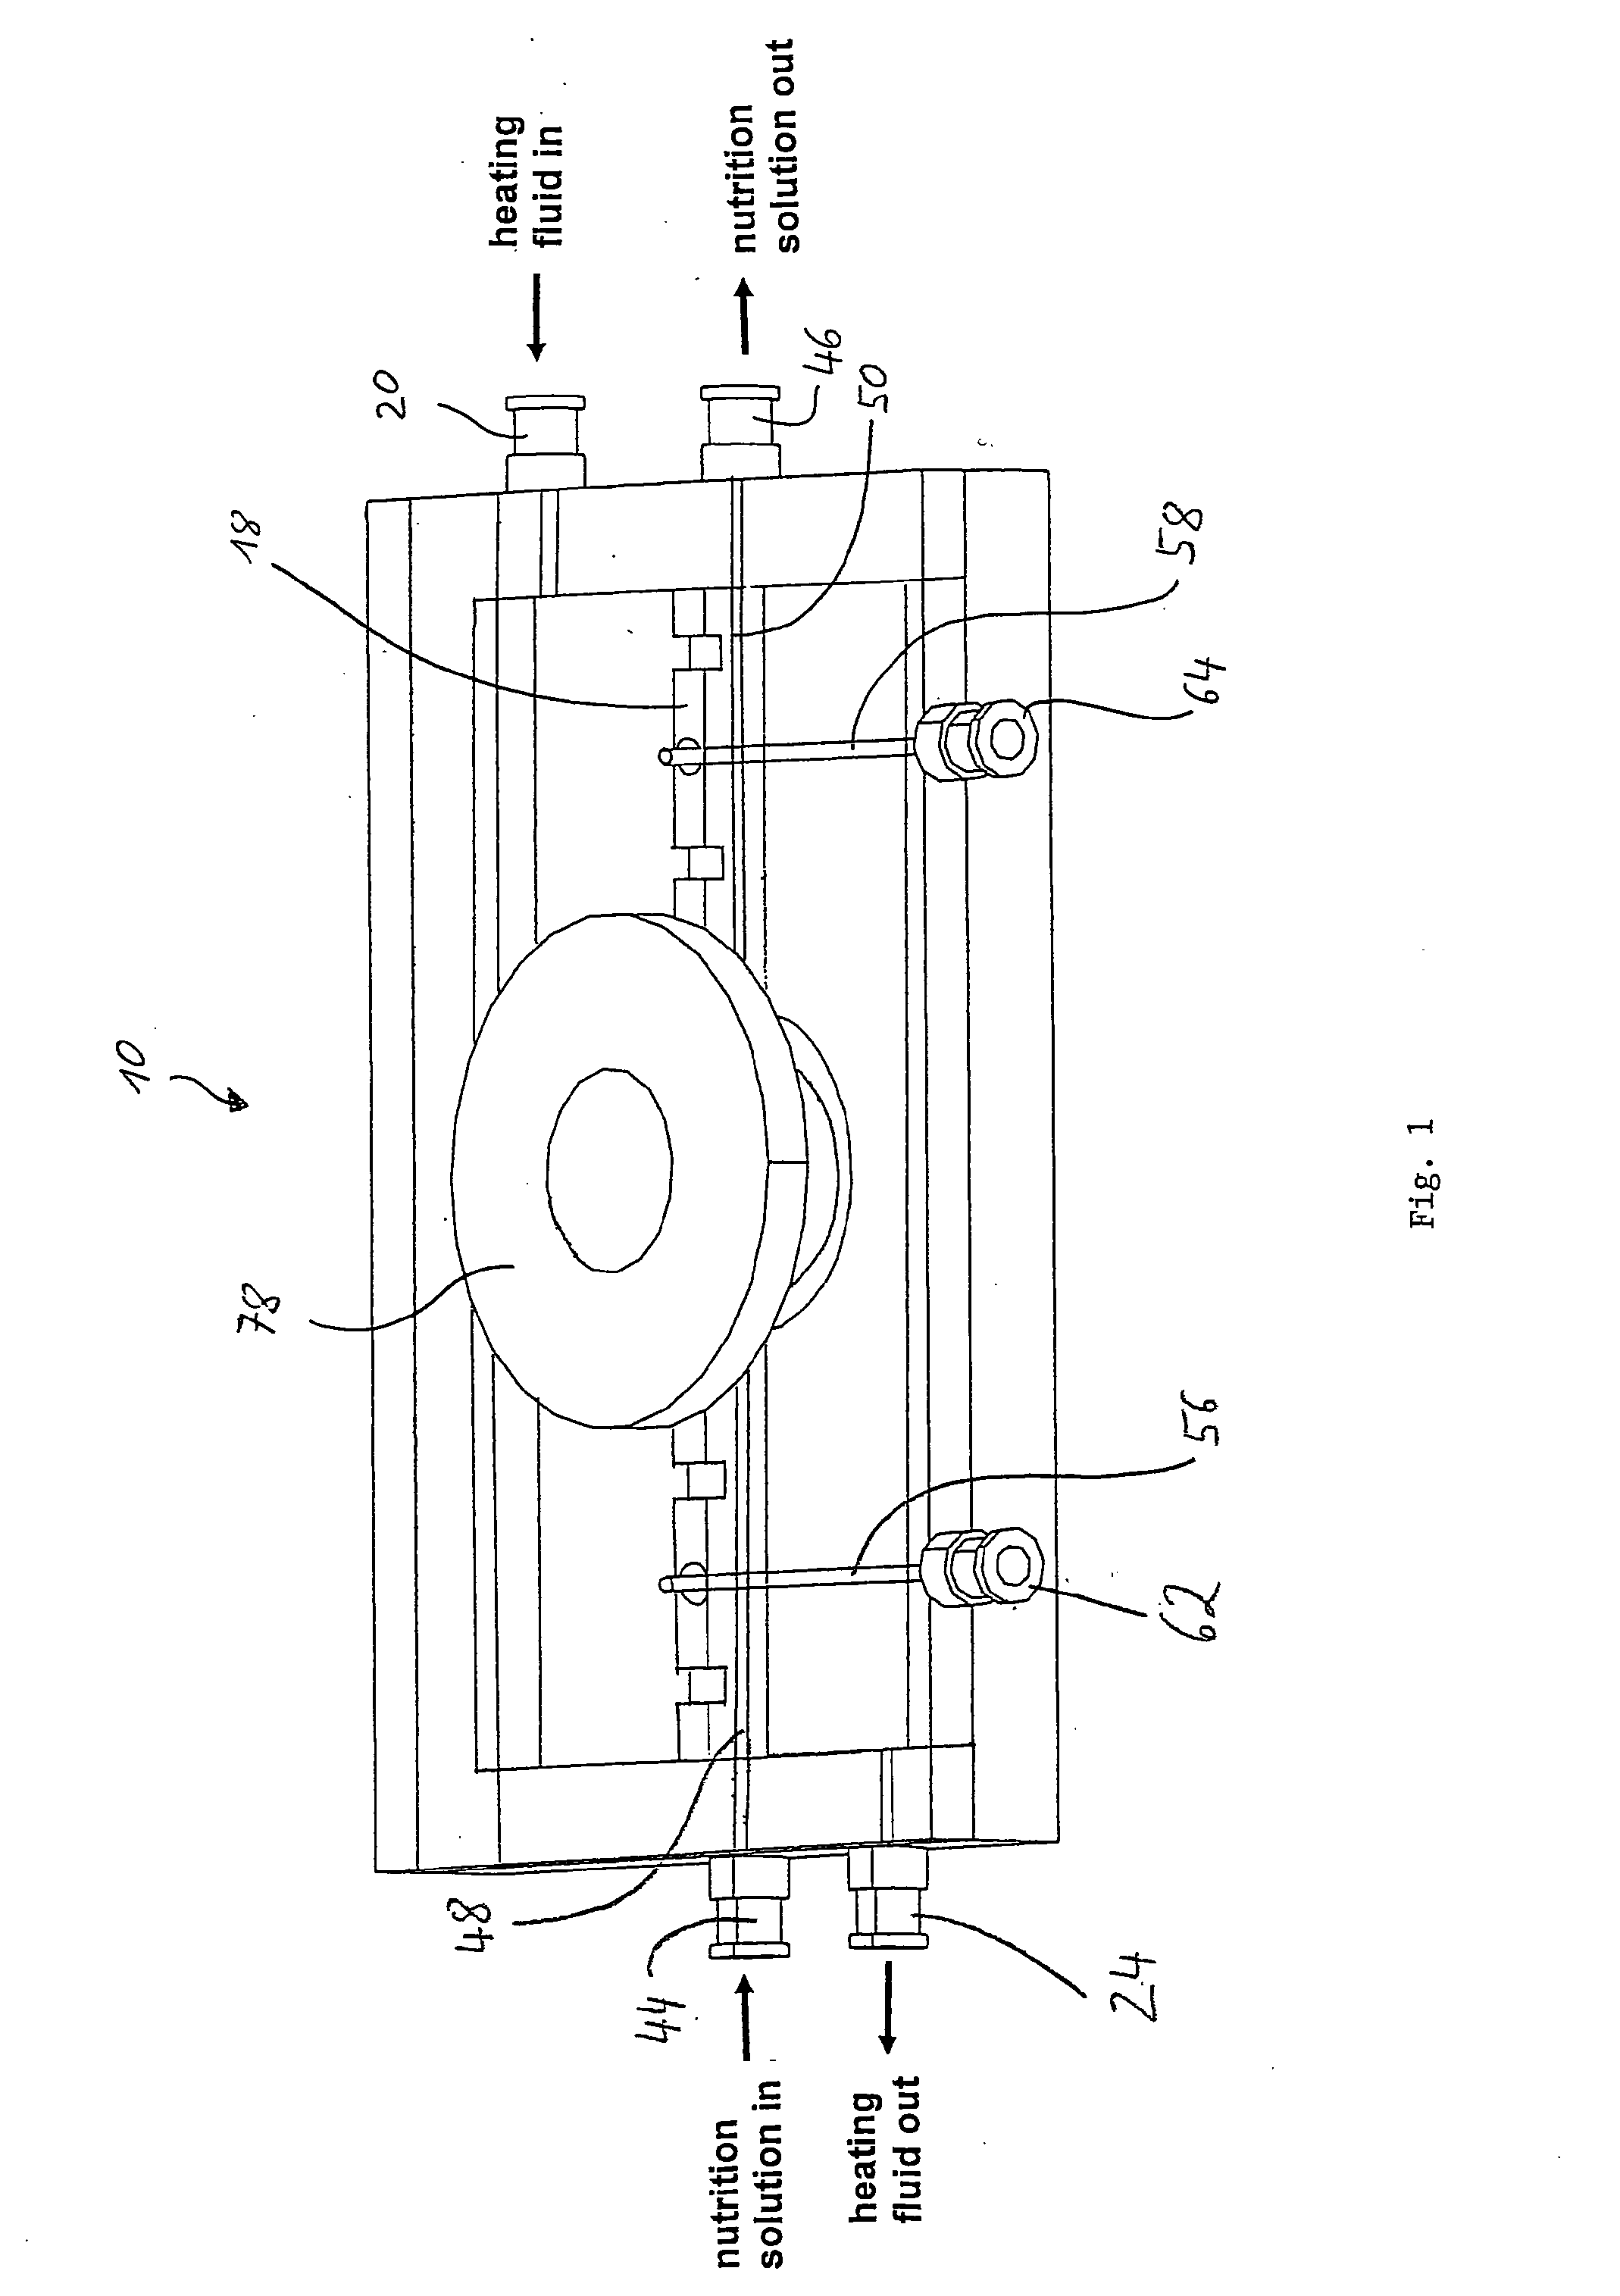 Method of examining tissue growth and conditioning of cells on a scaffold and a perfusion bioreactor